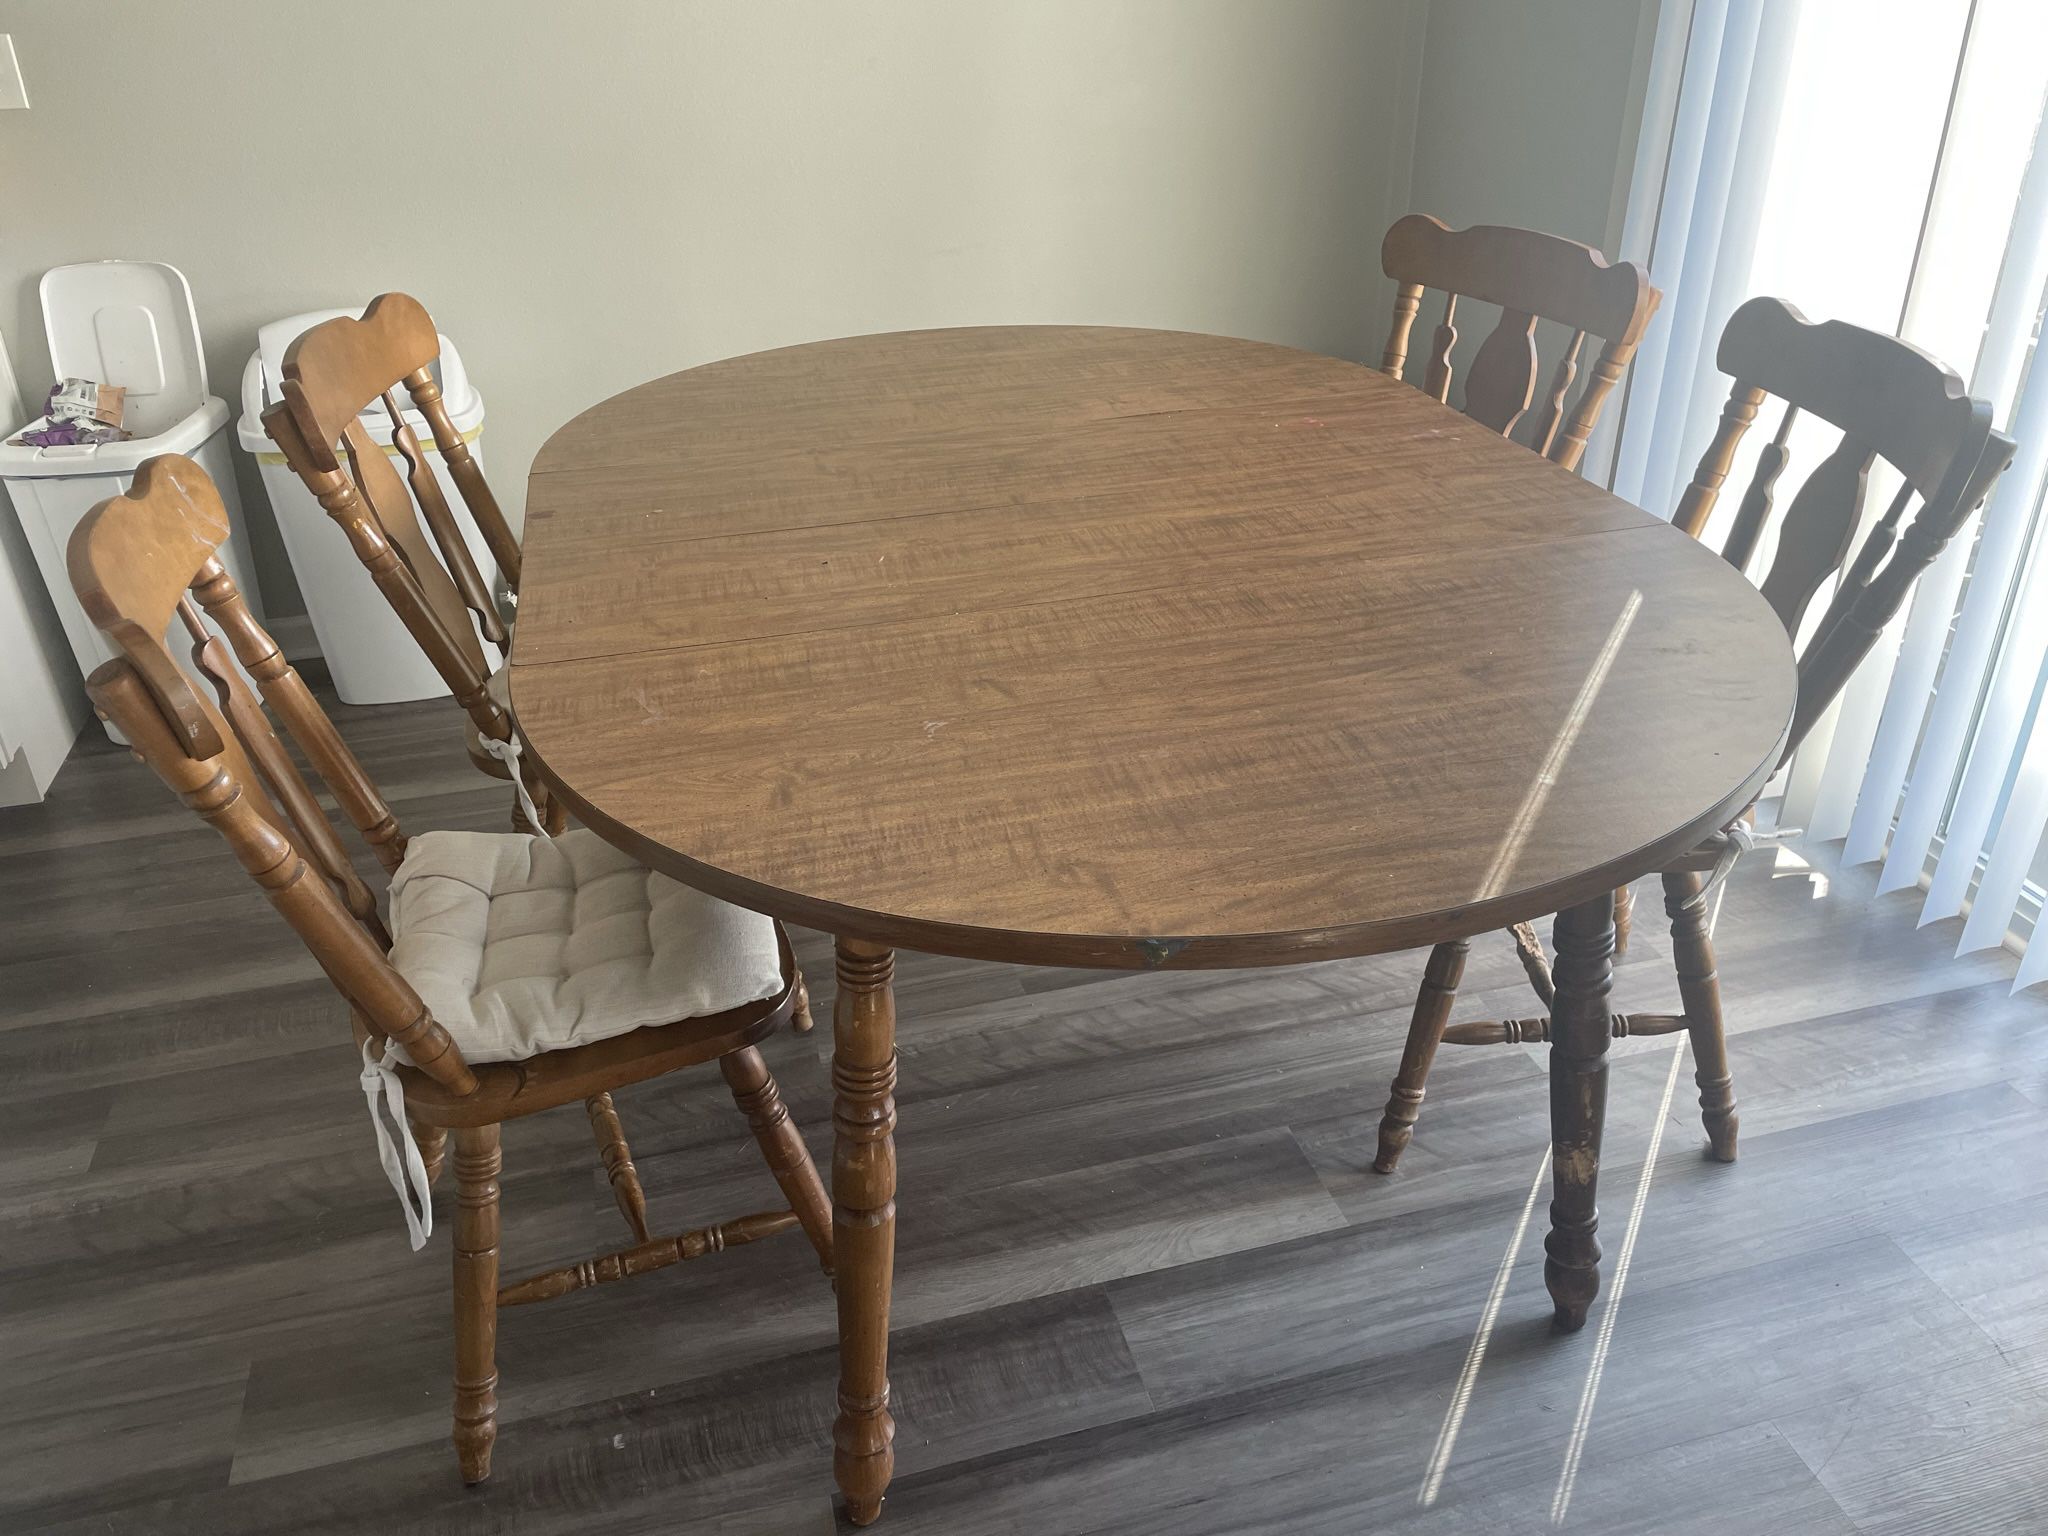 Dining Set With Expandable Table And Four Chairs